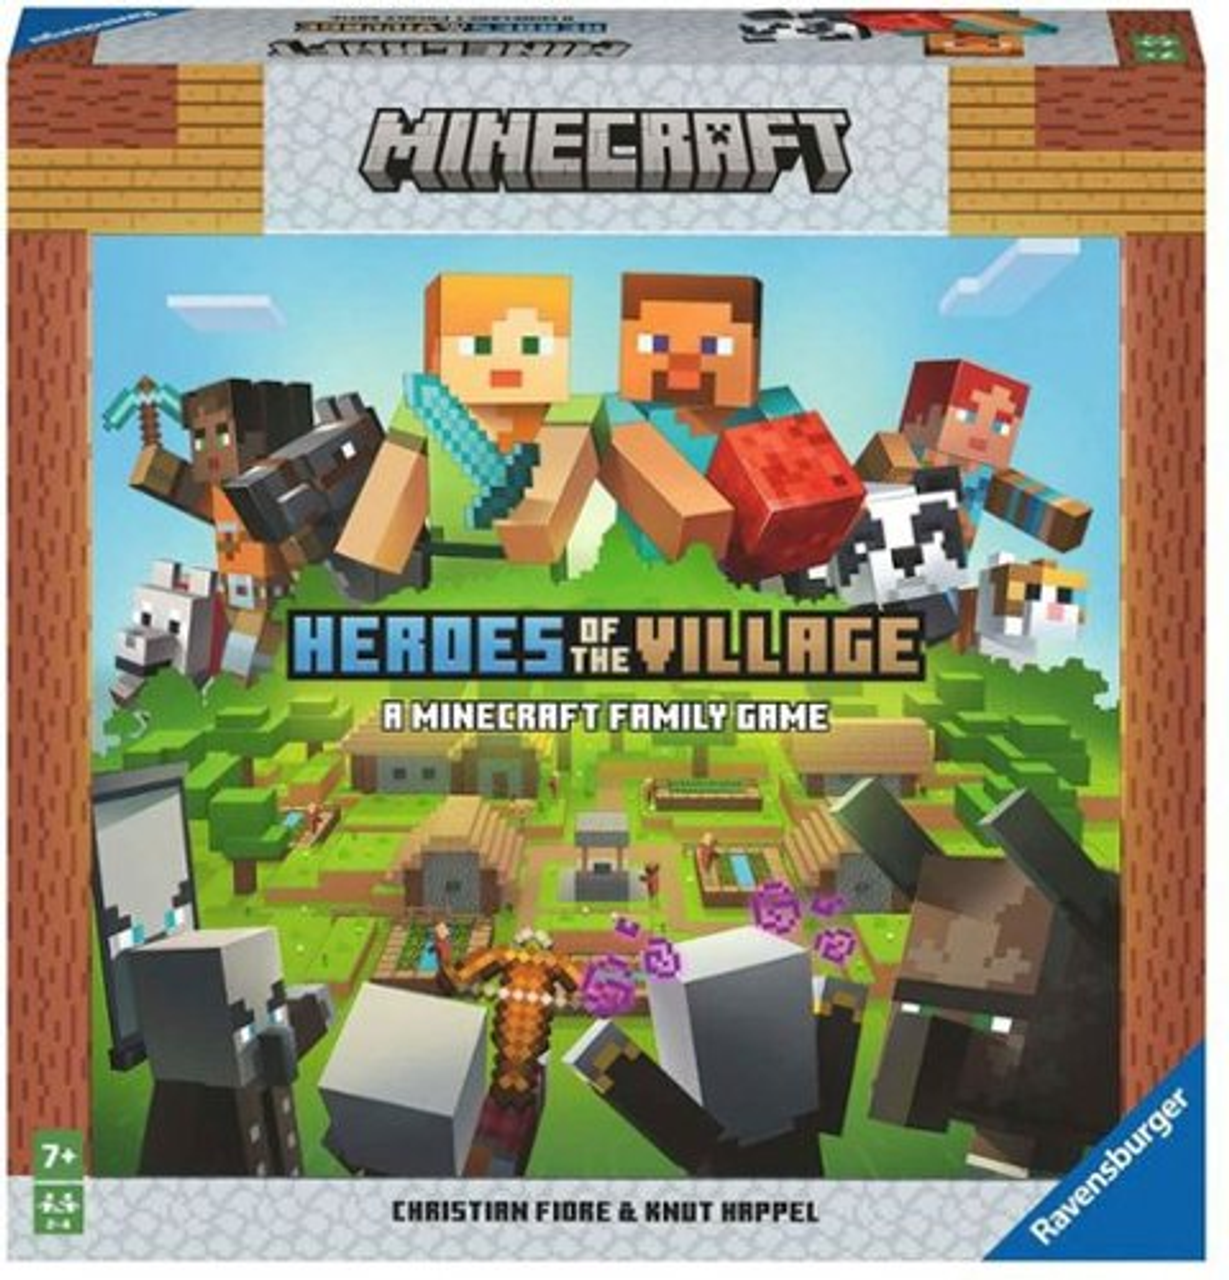 Ravensburger - Minecraft: Heroes of the Village - Cooperative Minecraft Board Game